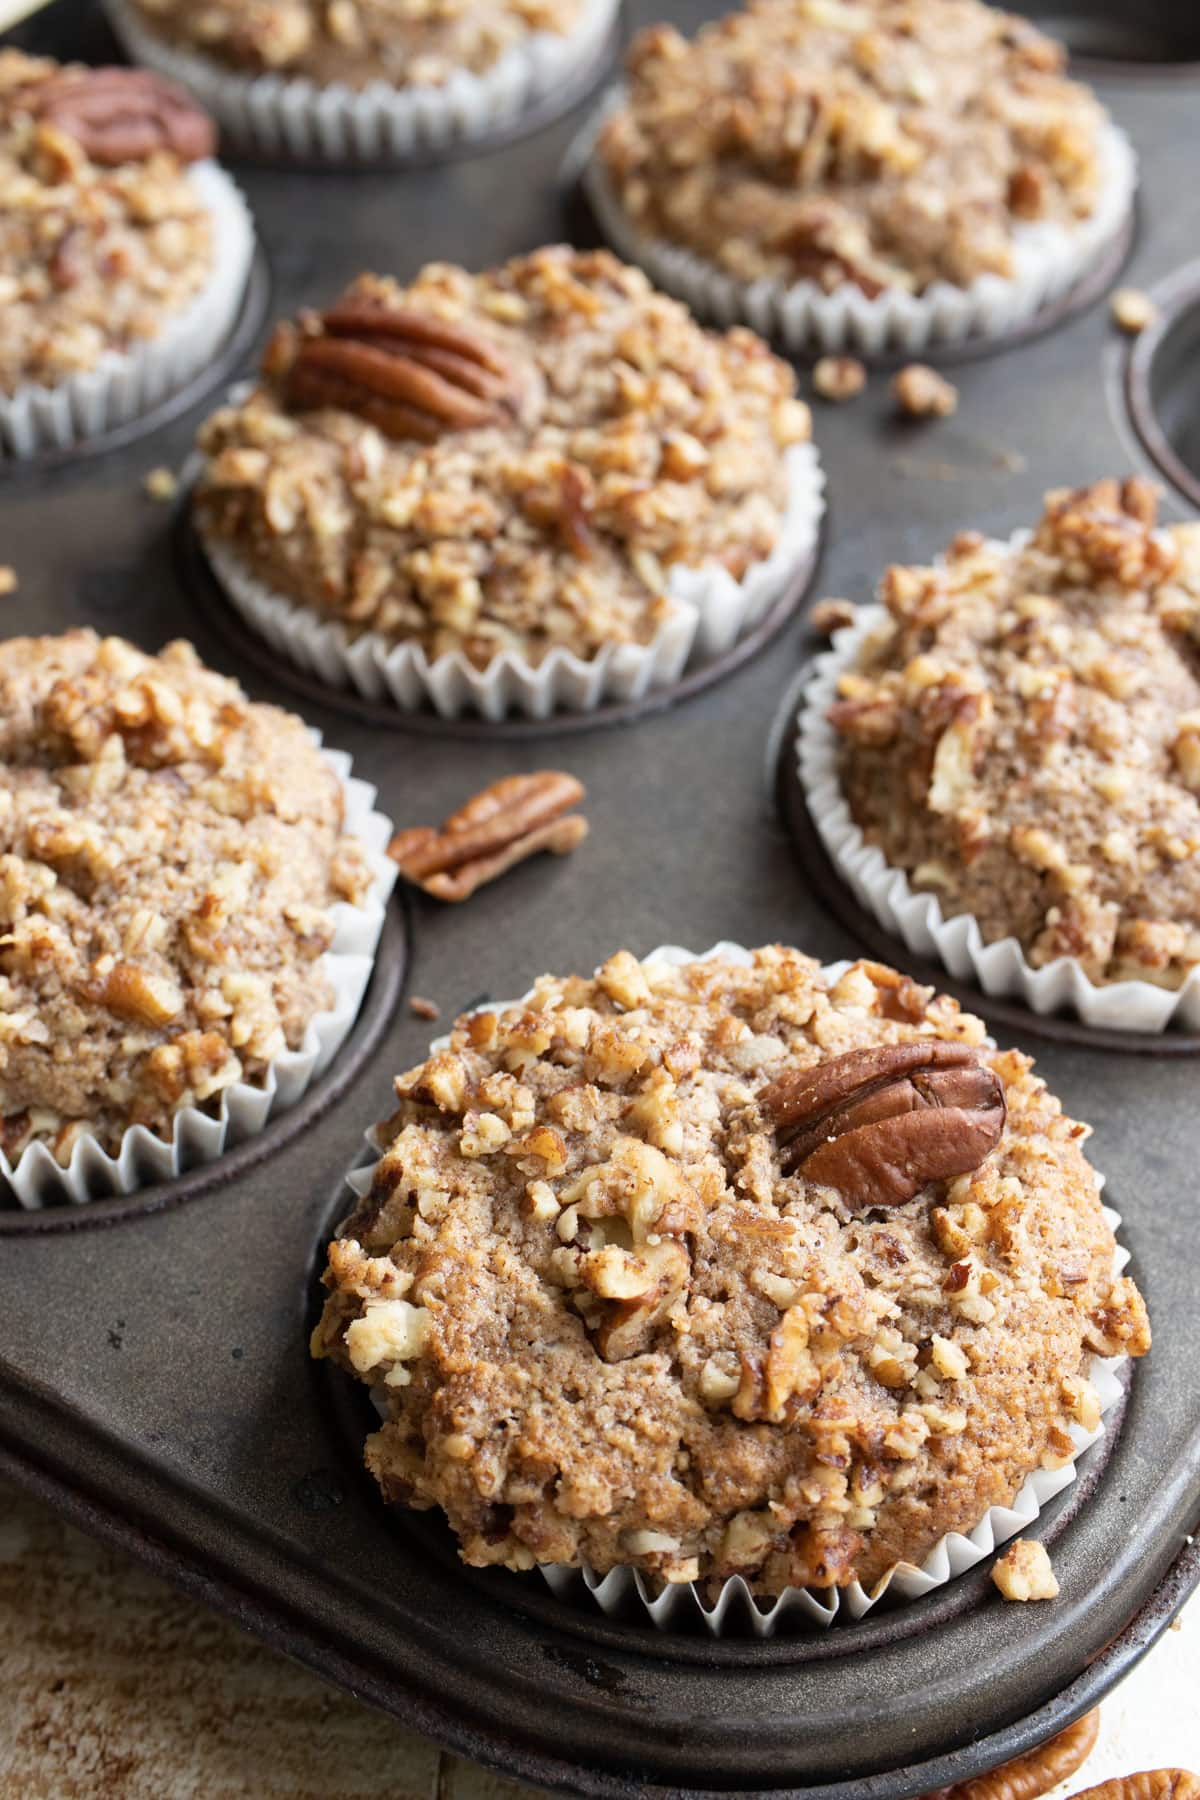 Cinnamon muffins topped with pecans